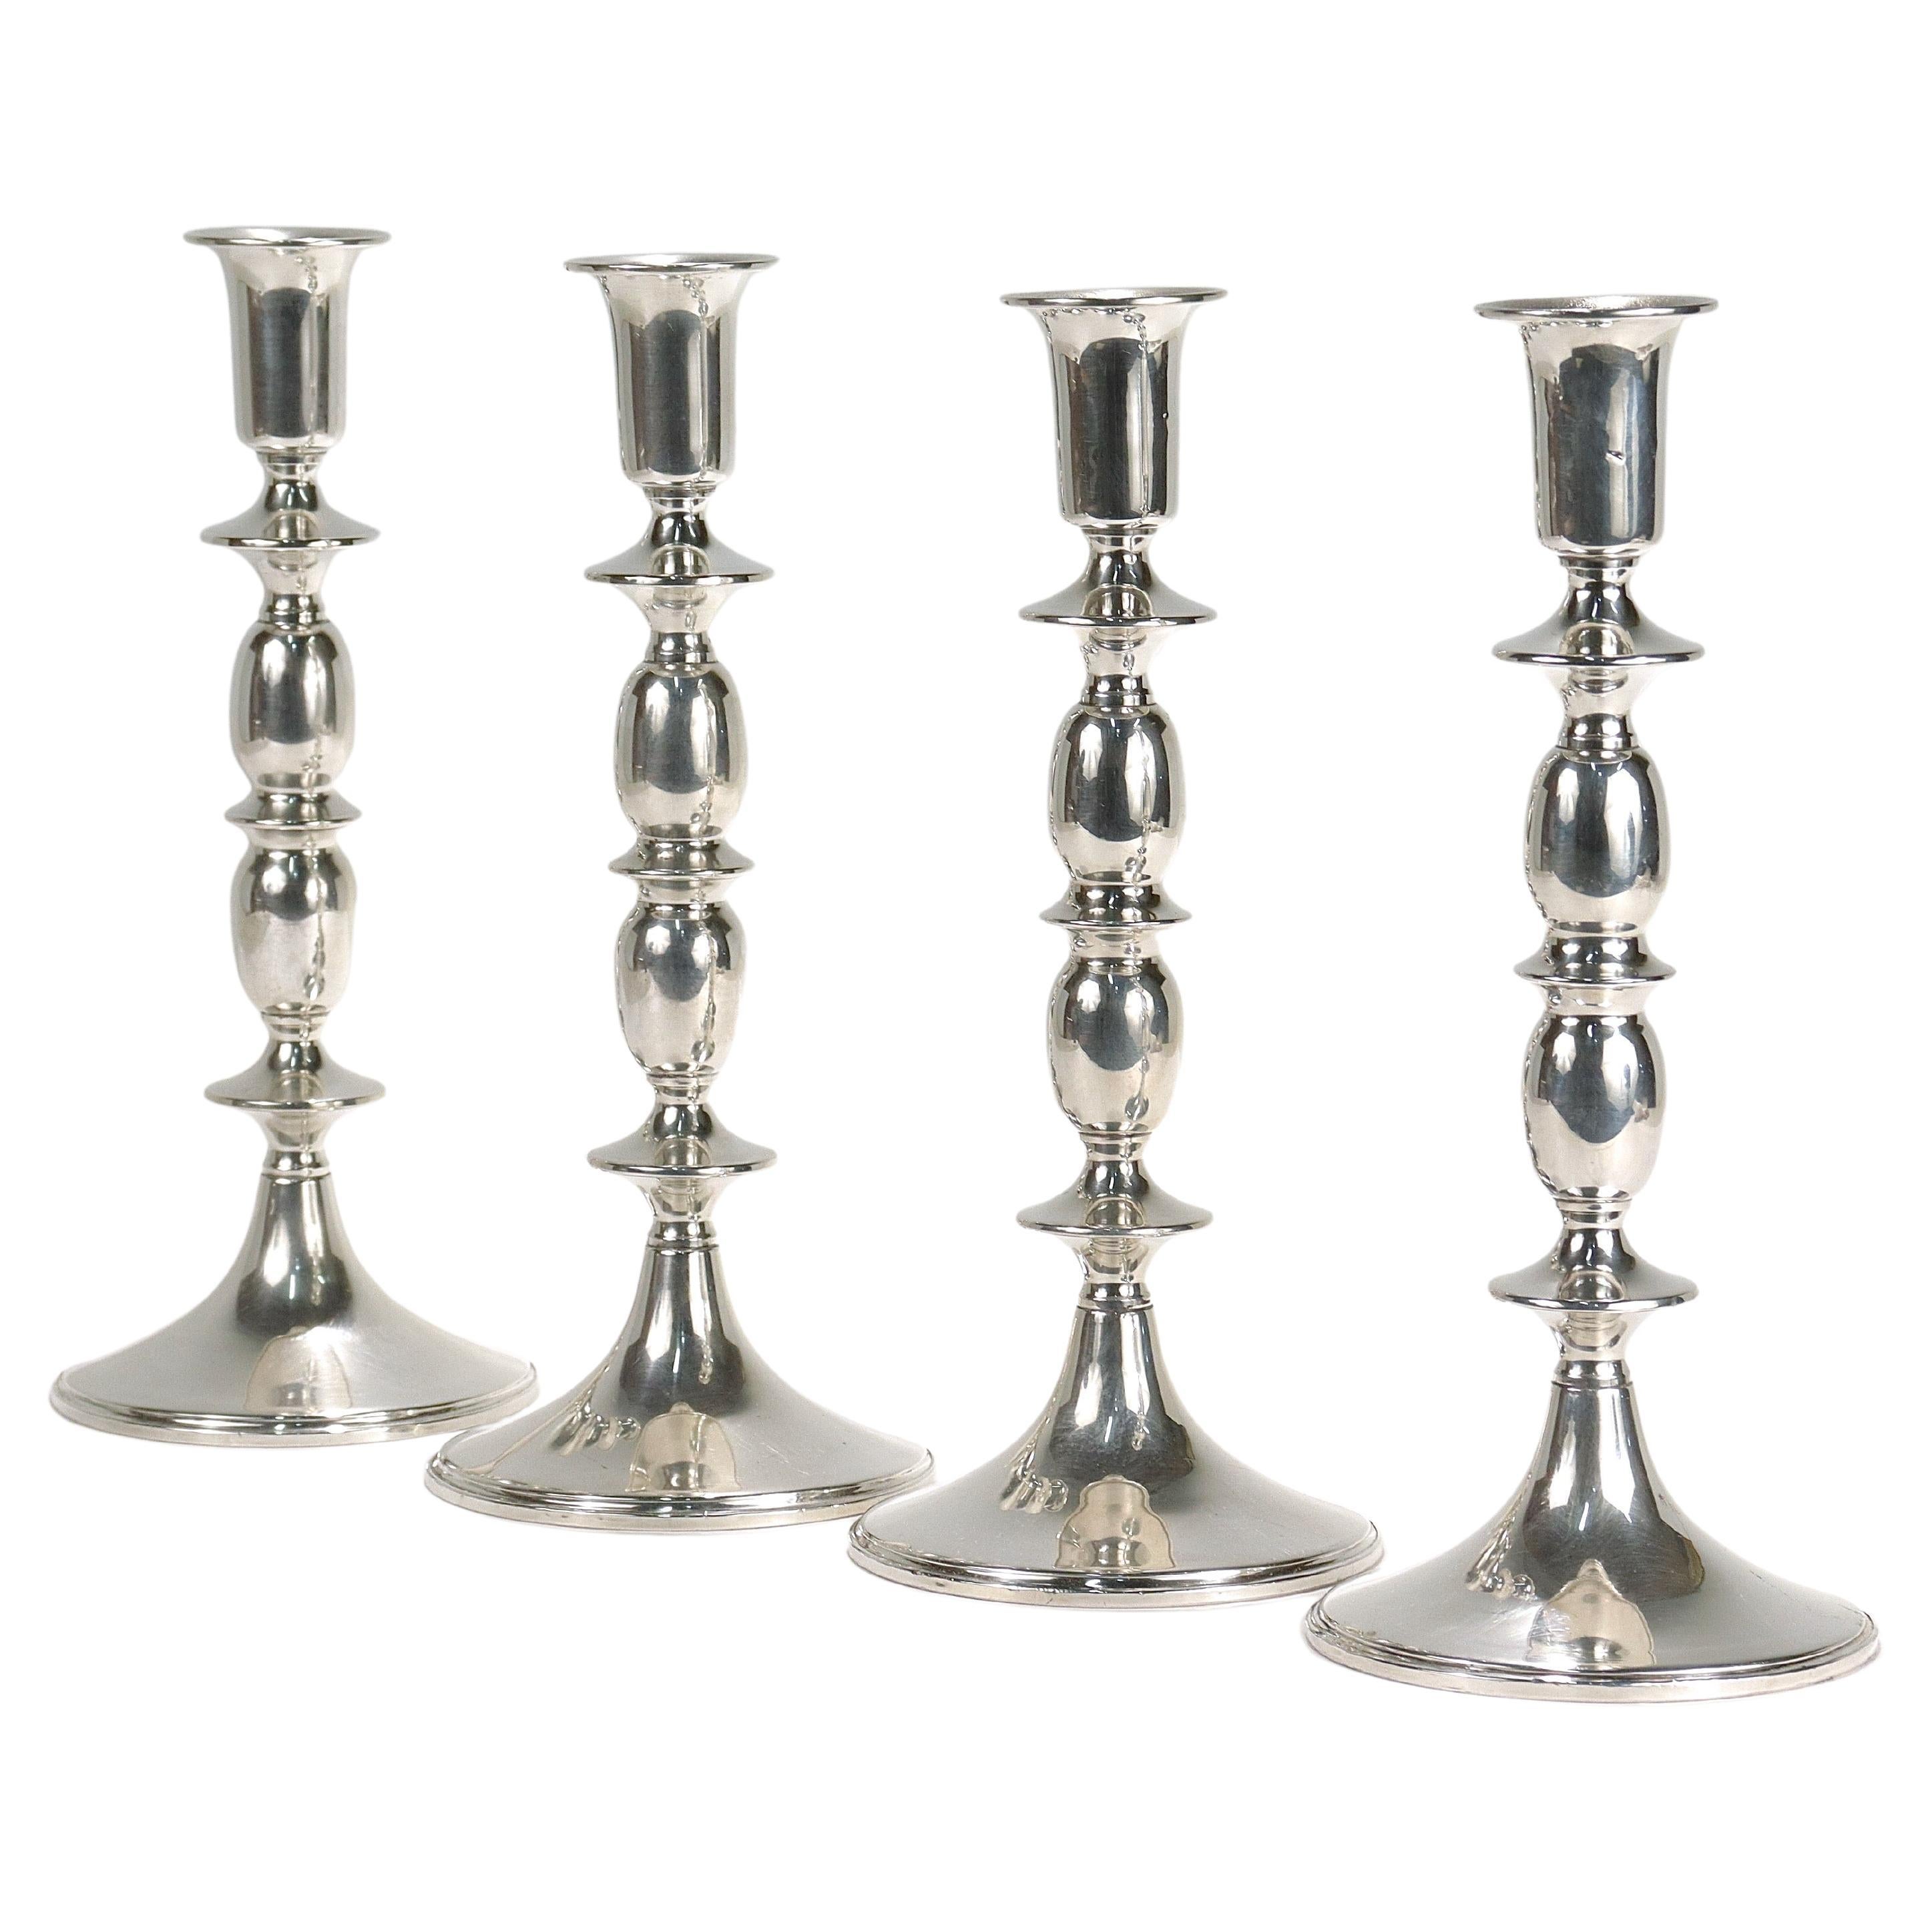 Set of 4 Matching Mid-Century Modern Sterling Silver Candlesticks/Candle Holders For Sale